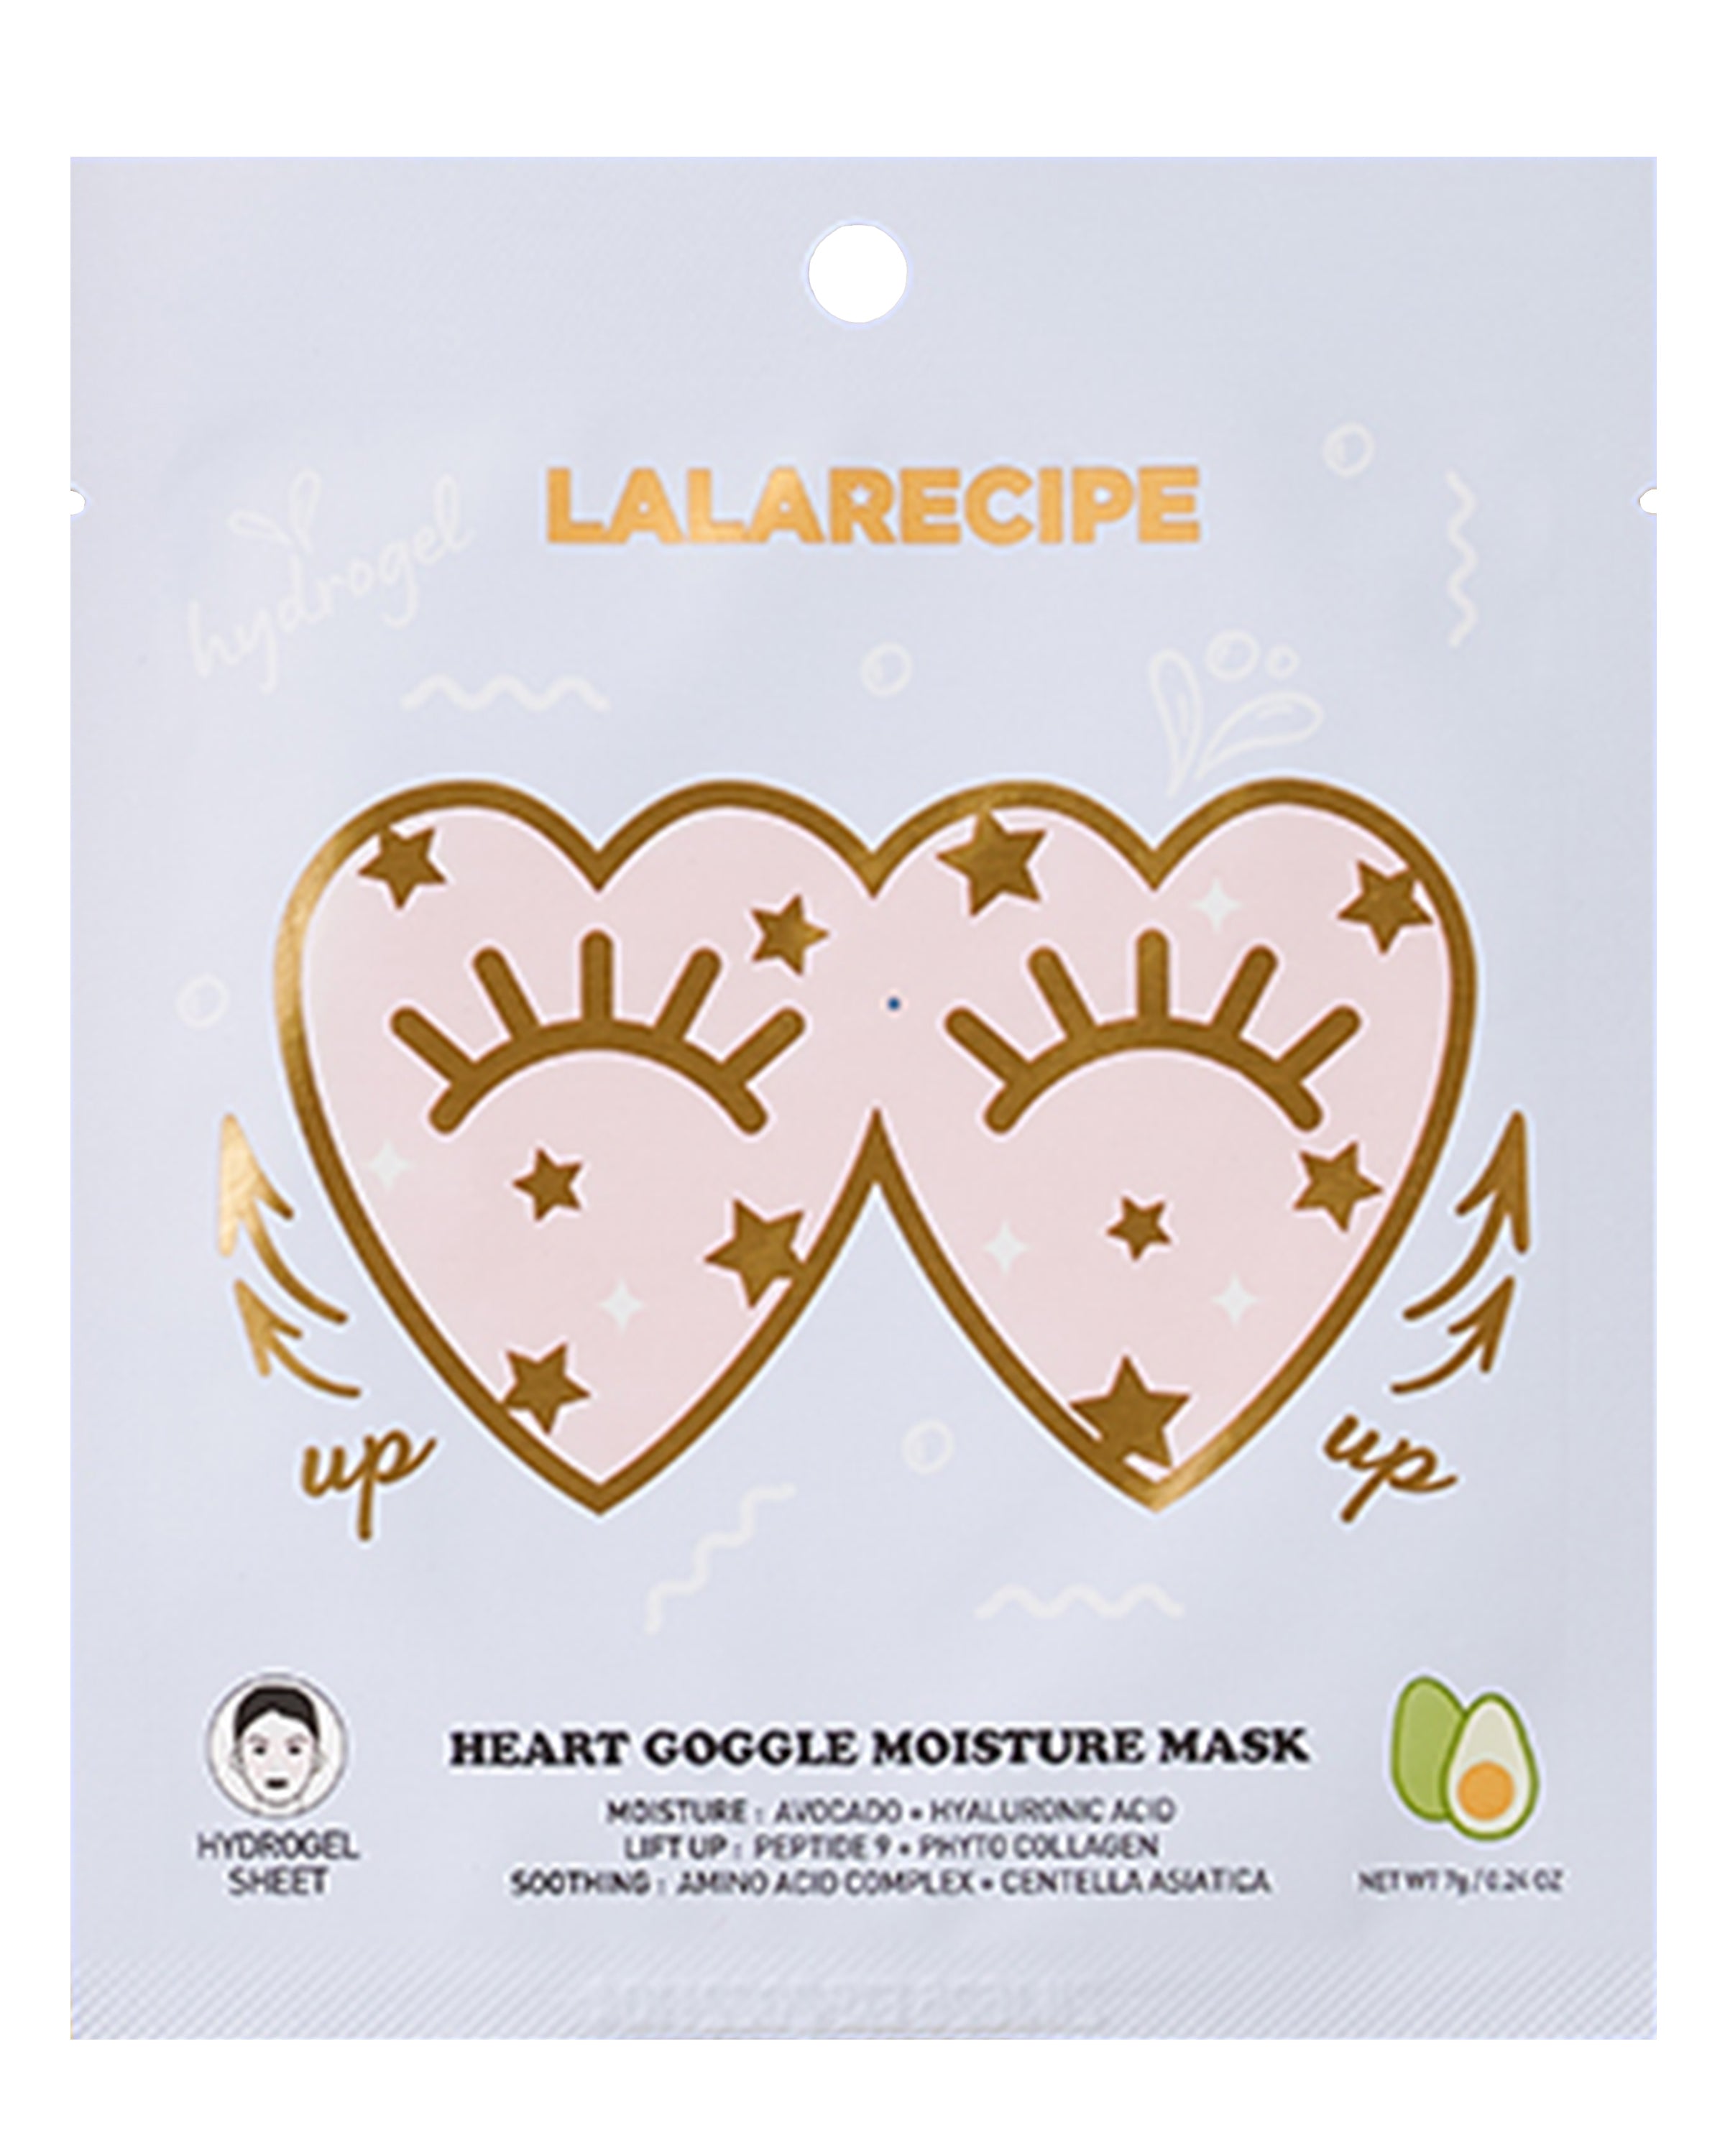 Lalarecipe Heart Goggle Moisture Mask 10pcs - moisturizing, avocado extract, Hyaluronic acid, lifting care, for cheeks, soothing care, Natural Ingredients (10pcs) made in Korea